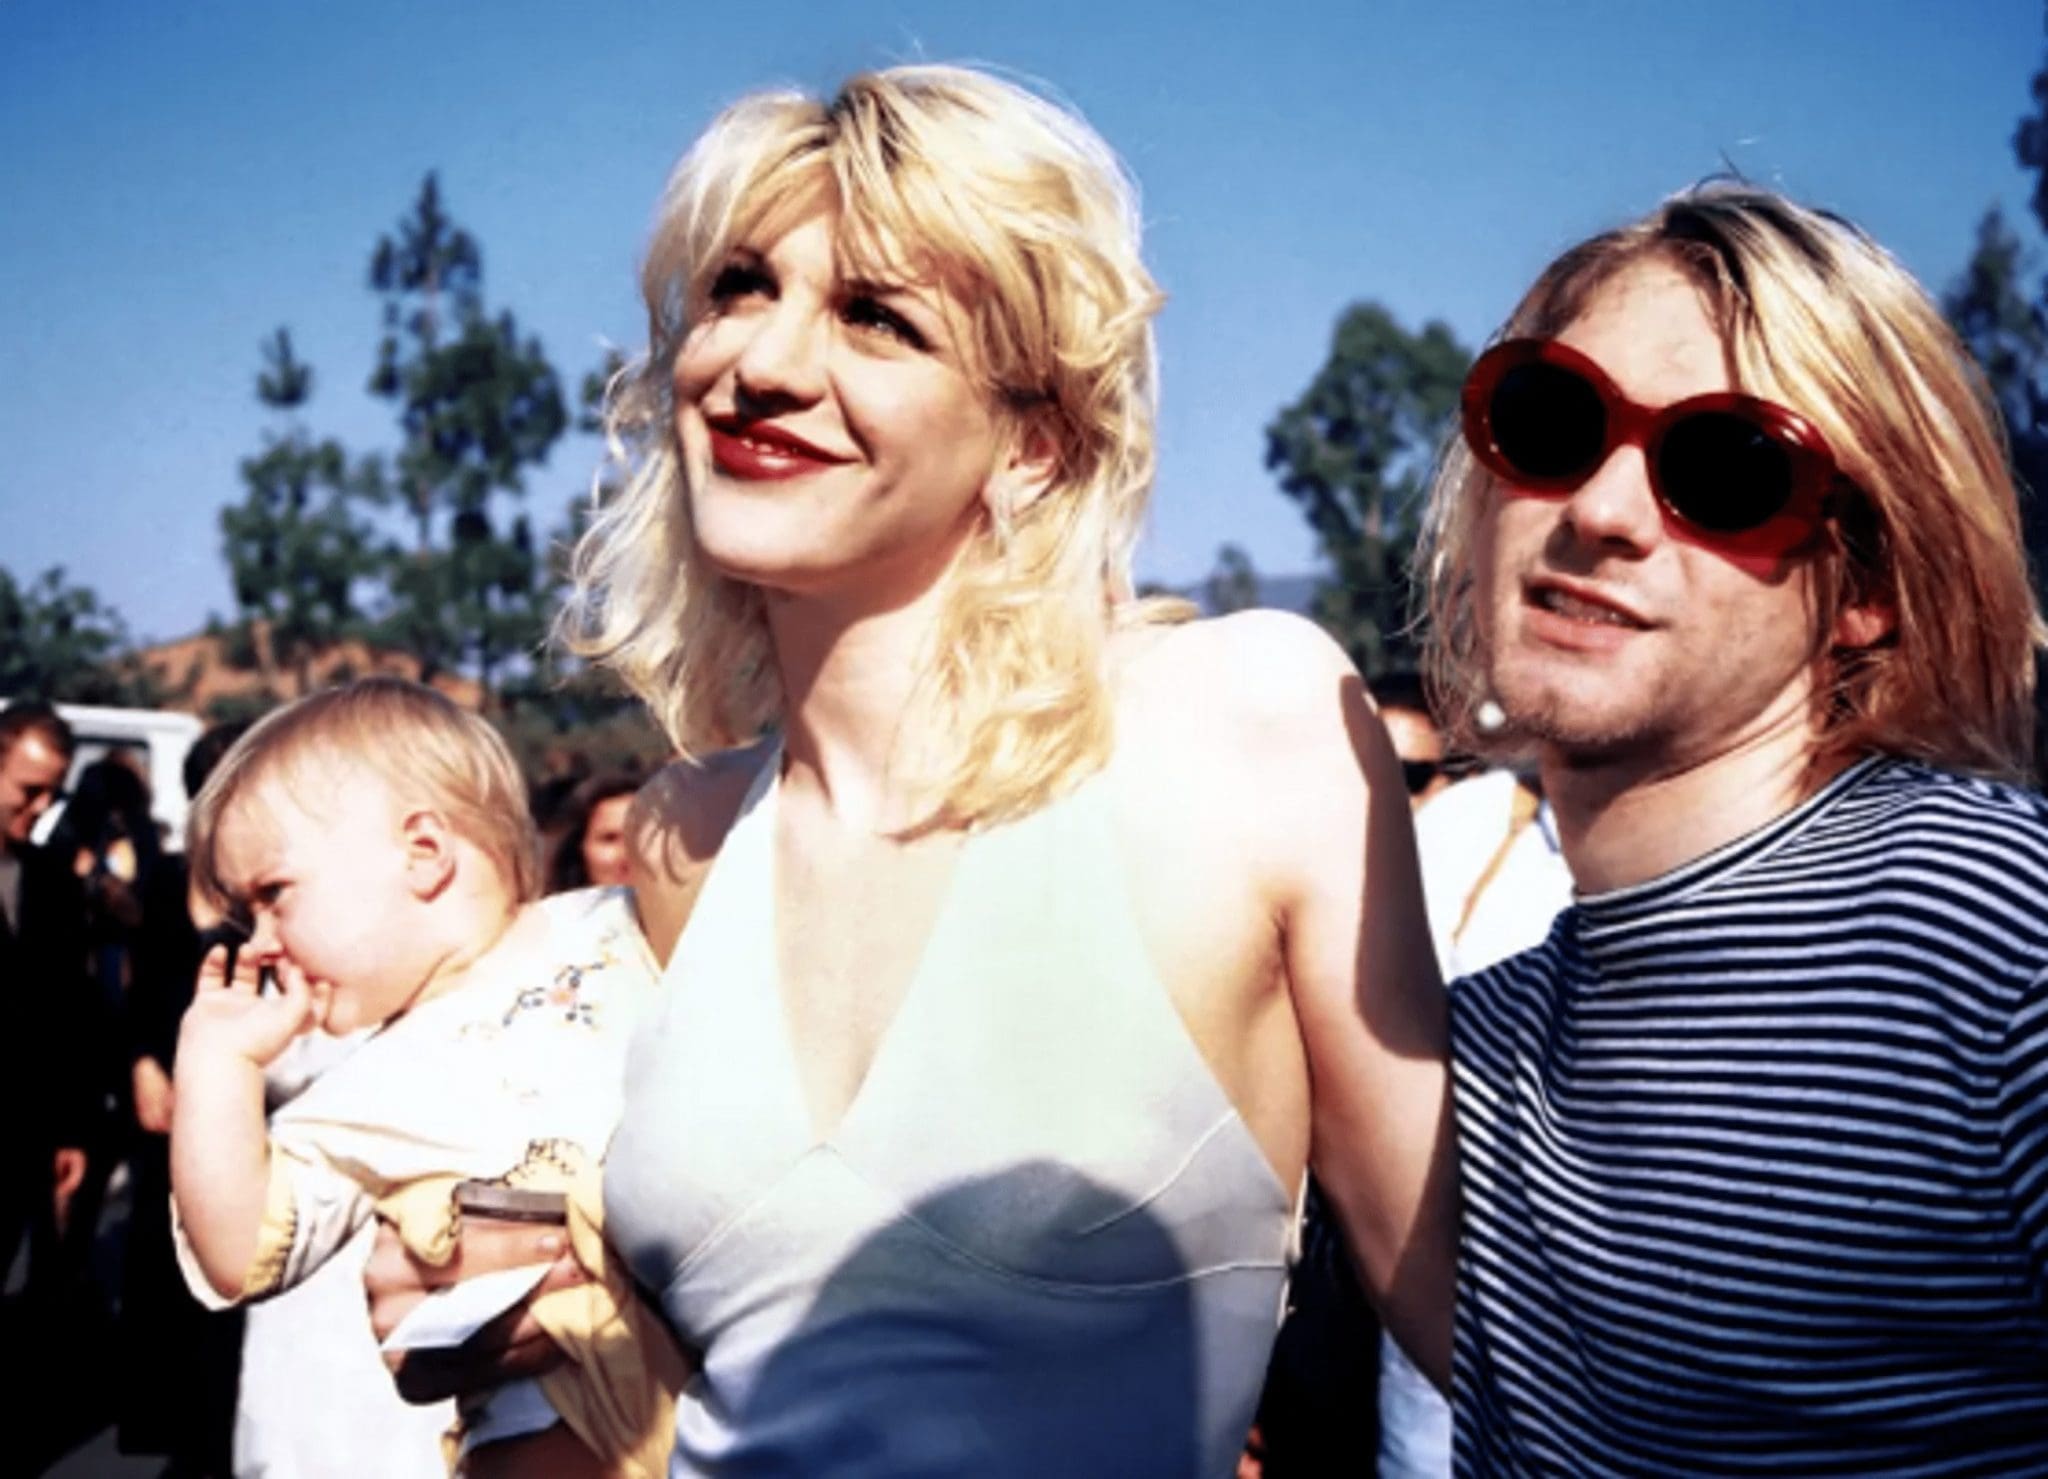 After A 'Decade' Of Writing, Courtney Love Declares Her Memoir To Be Finished